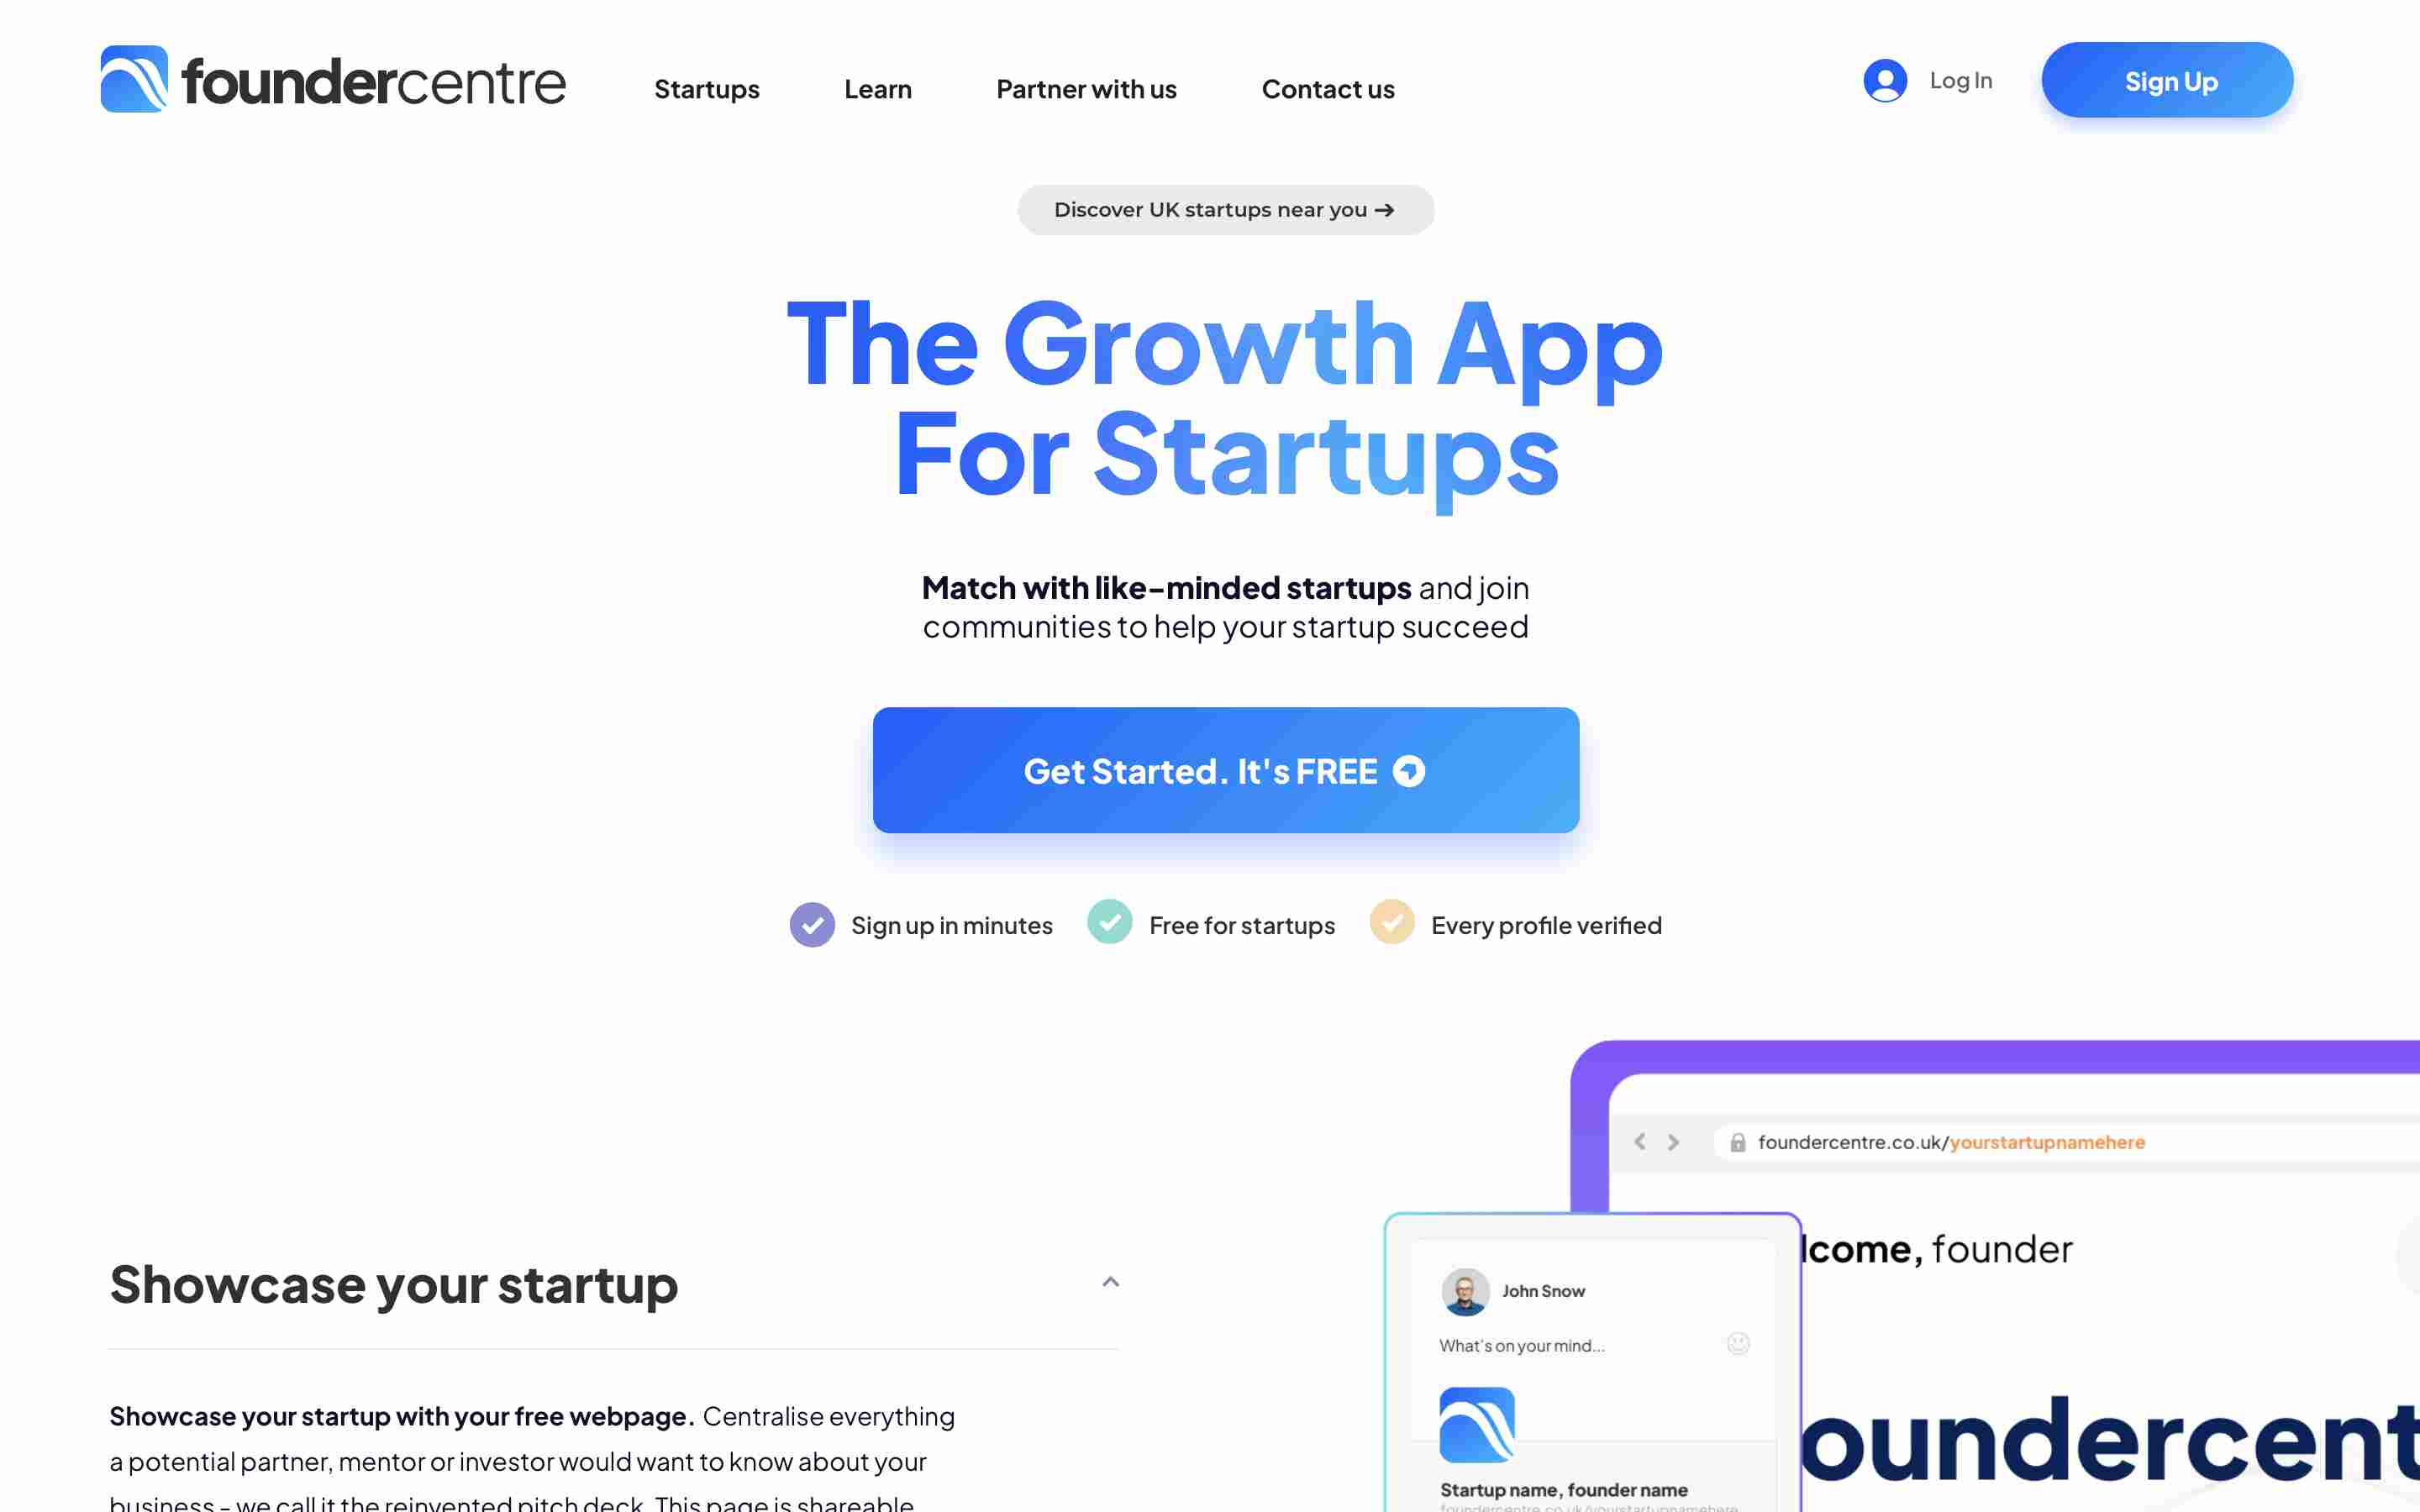 Foundercentre, the growth app for startups